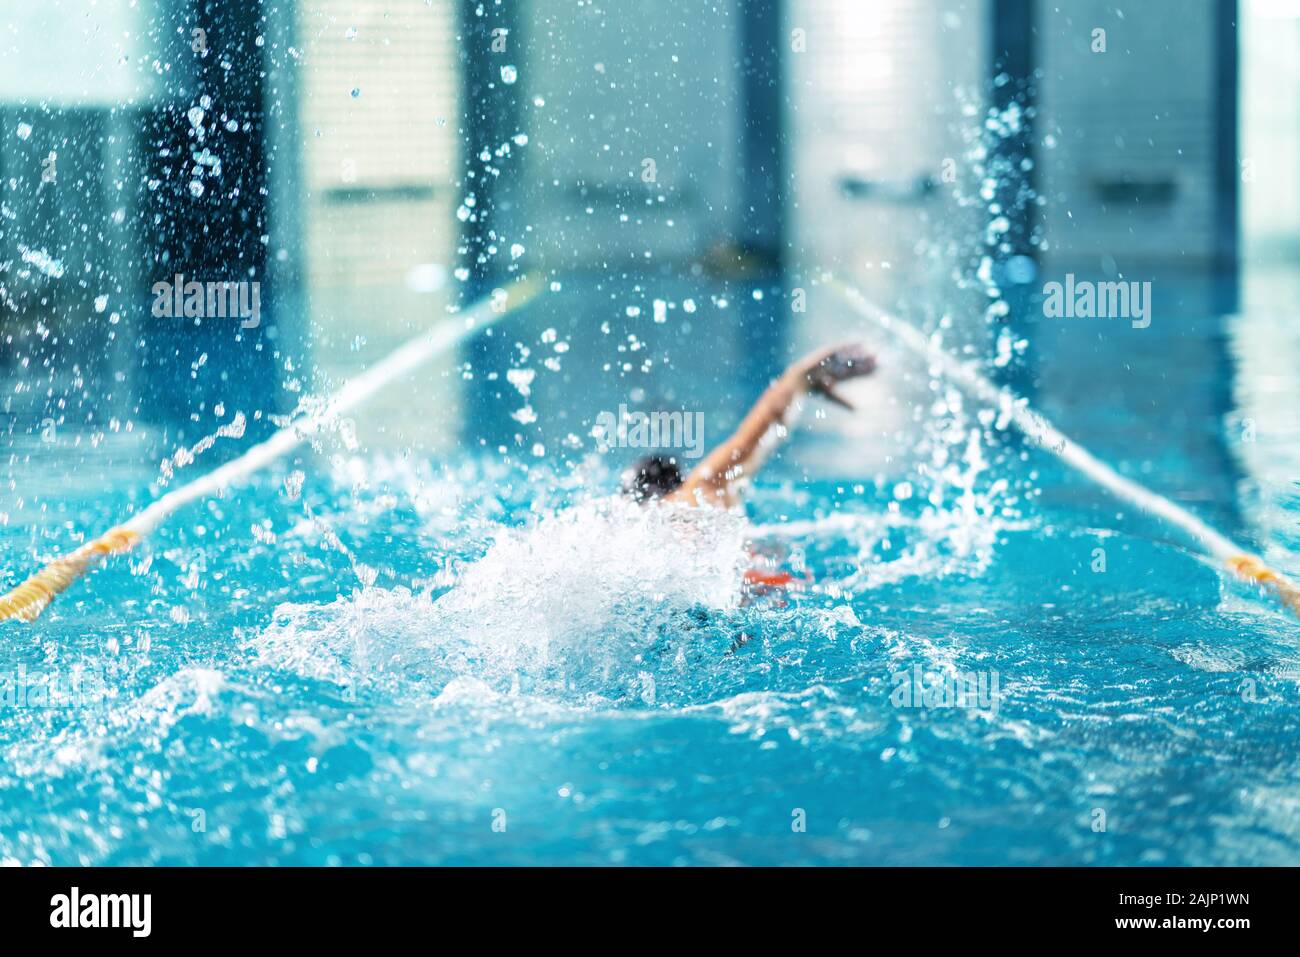 professional swimmer doing exercise in indoor swimming pool. Stock Photo